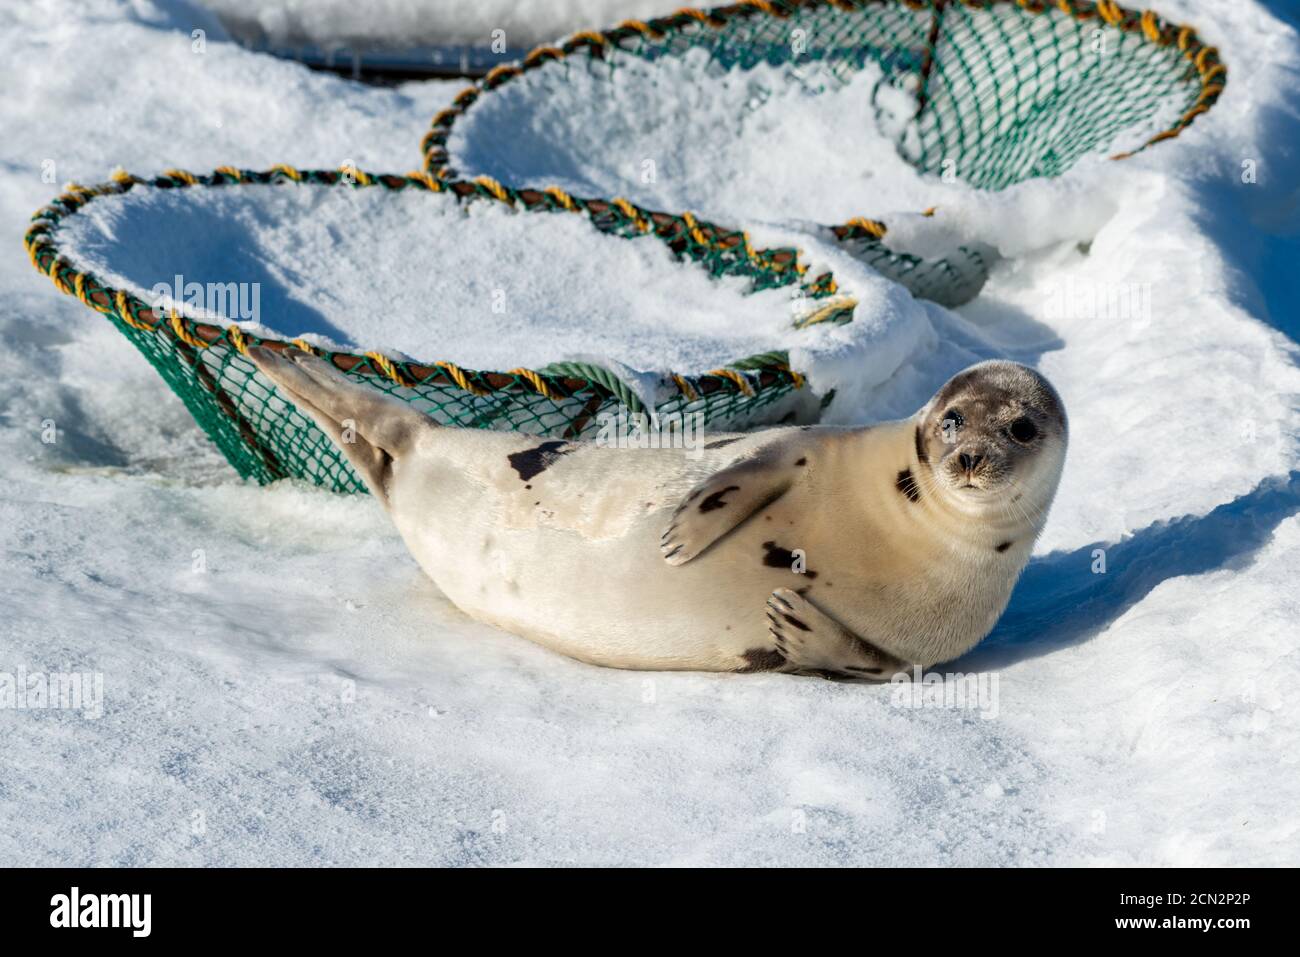 A large wild harp seal laying on a bed of ice and snow. The silver-grey fur with dark spots or harp-shaped markings is shiny and thick. Stock Photo